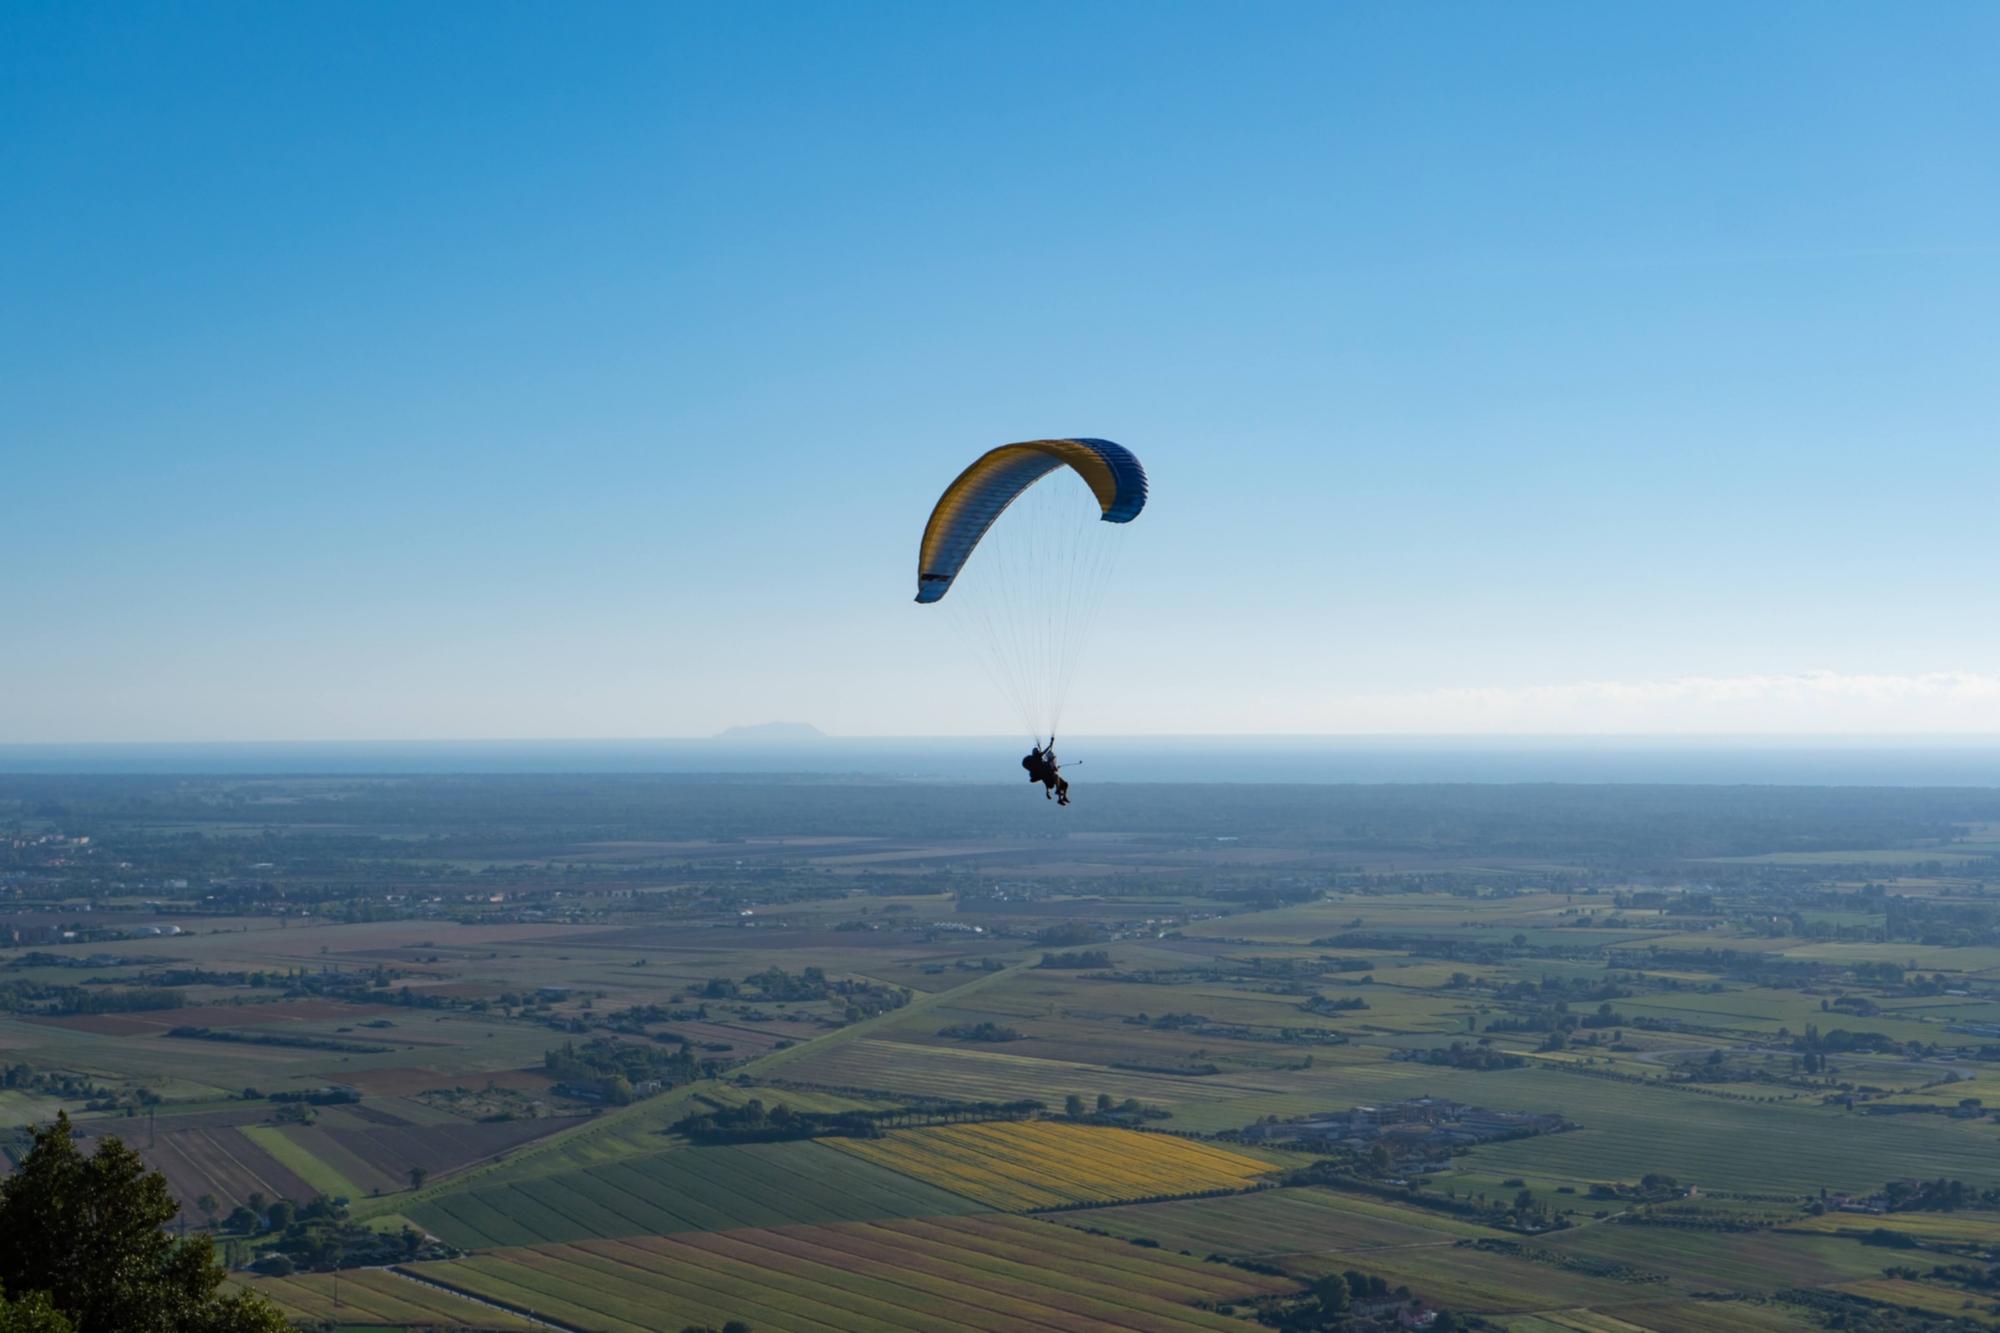 paraglider flying over the countryside with the sea on the horizon